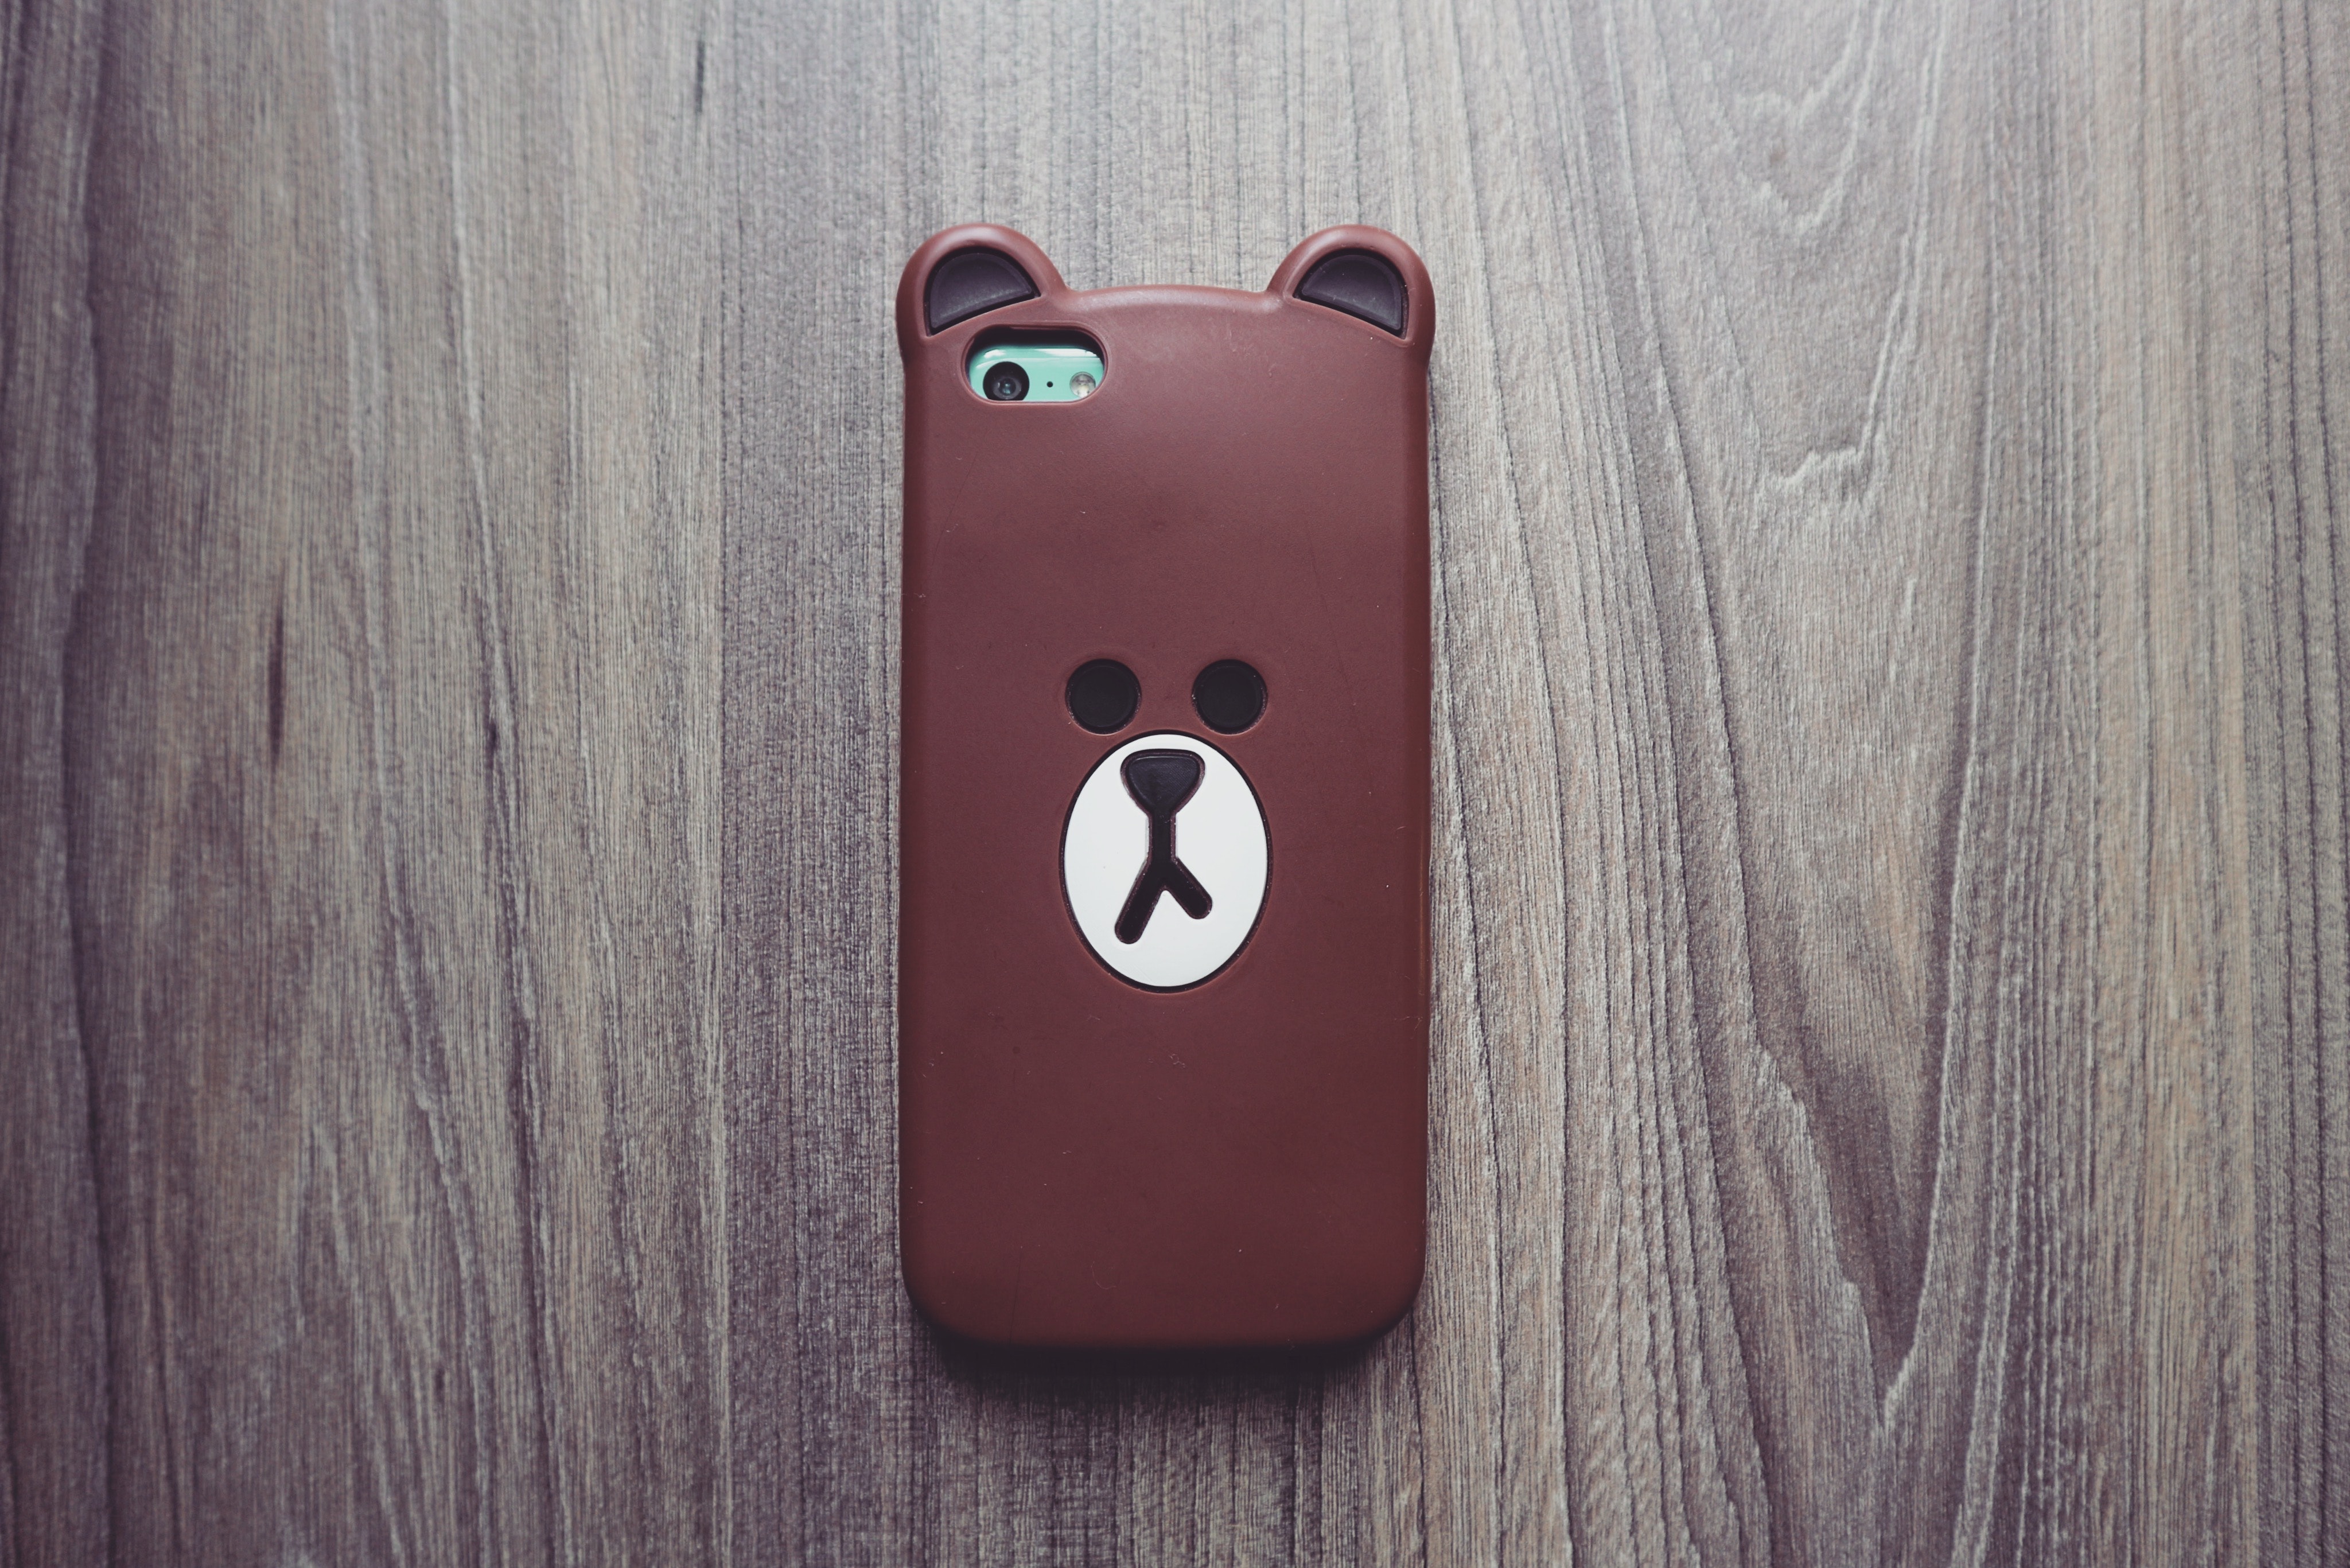 Photography of Brown Bear Iphone Case, Case, Cellphone, Design, Desk, HQ Photo